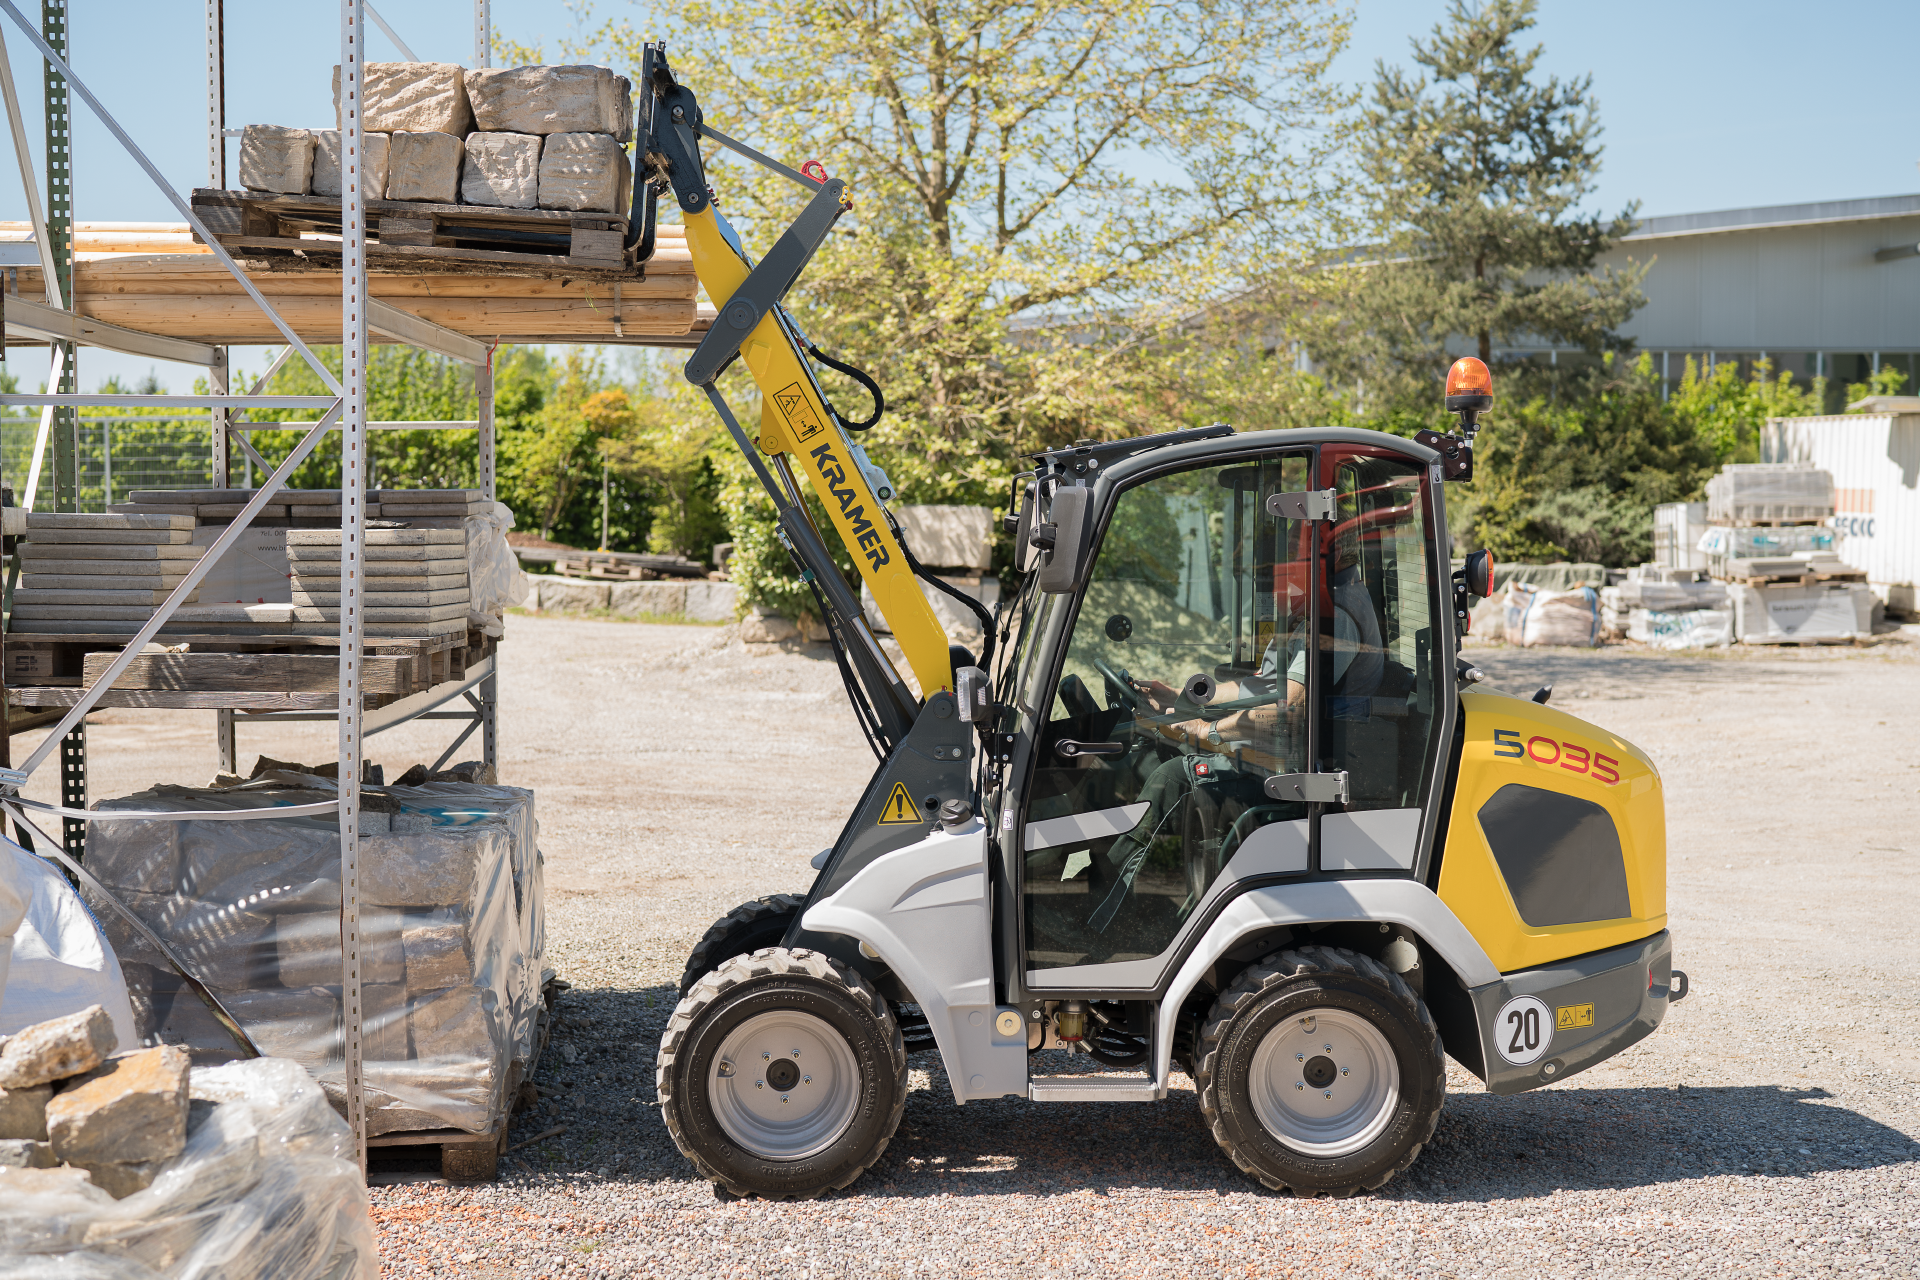 The compact 5035 while loading a stone pallet.